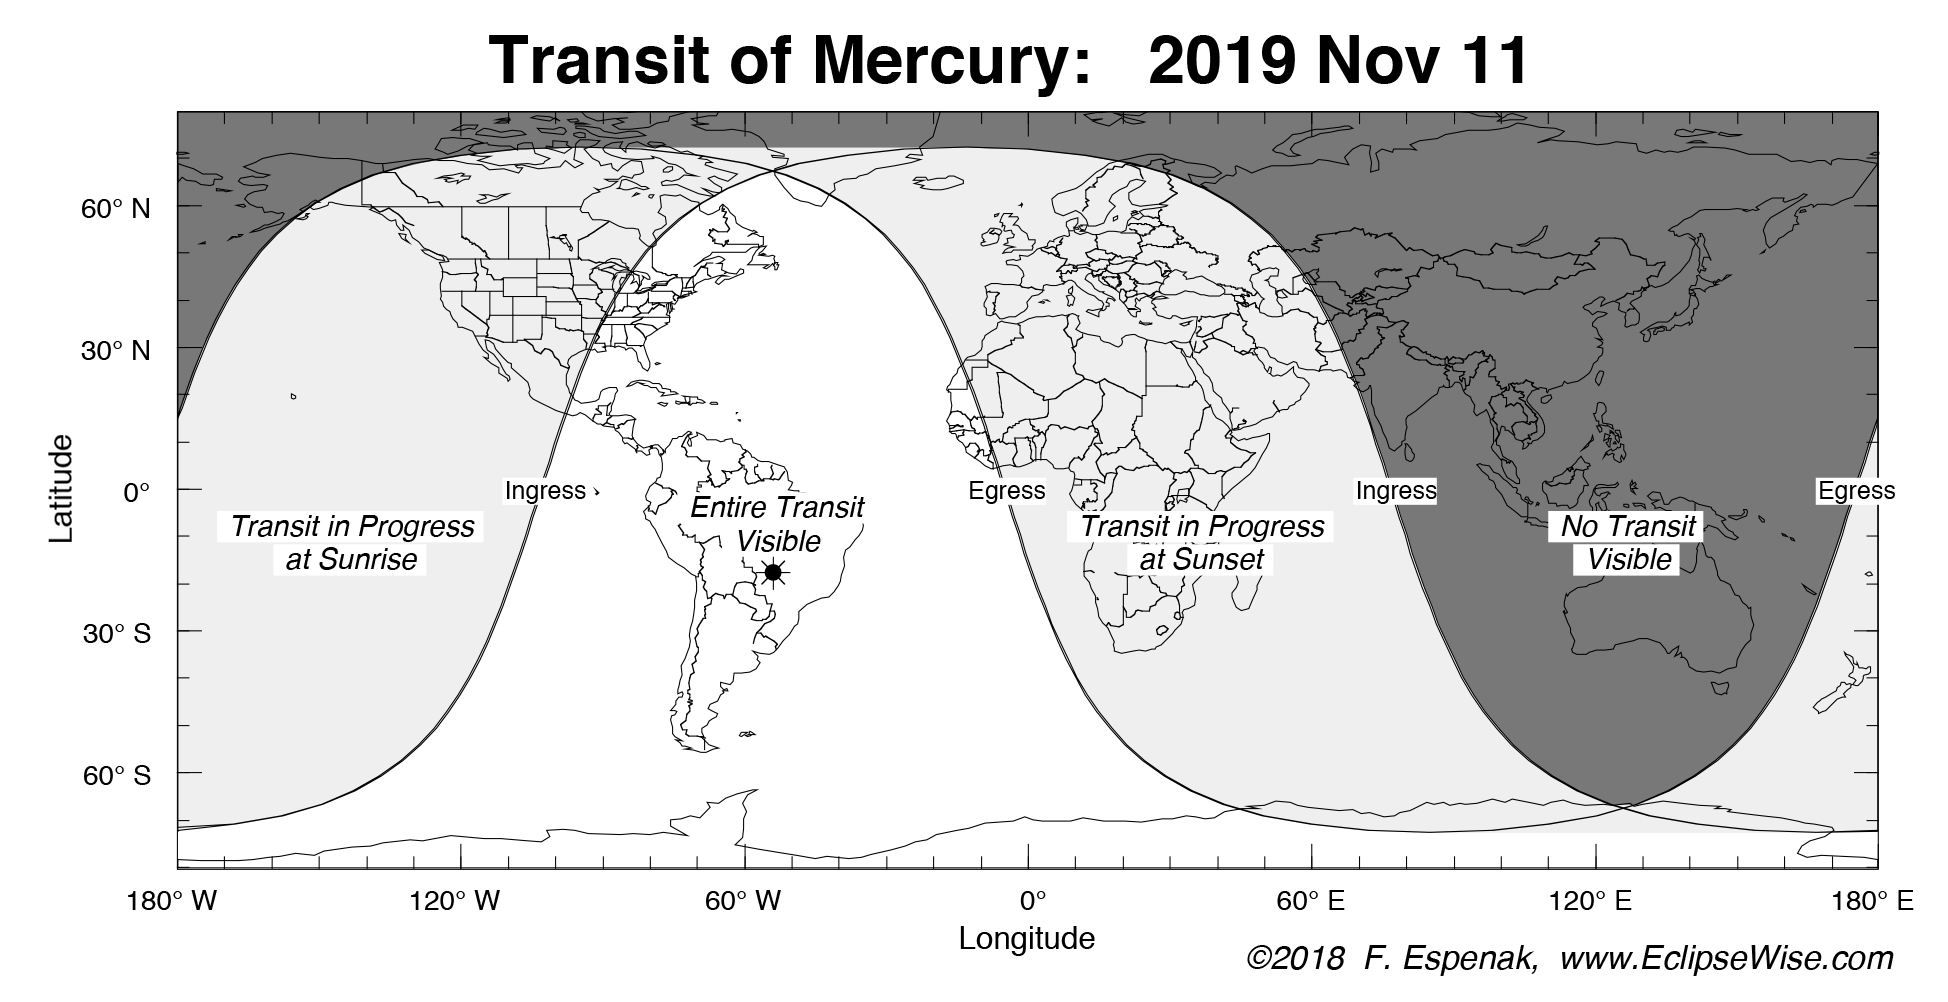 A visibility map for the Mercury transit on Nov. 11, 2019.